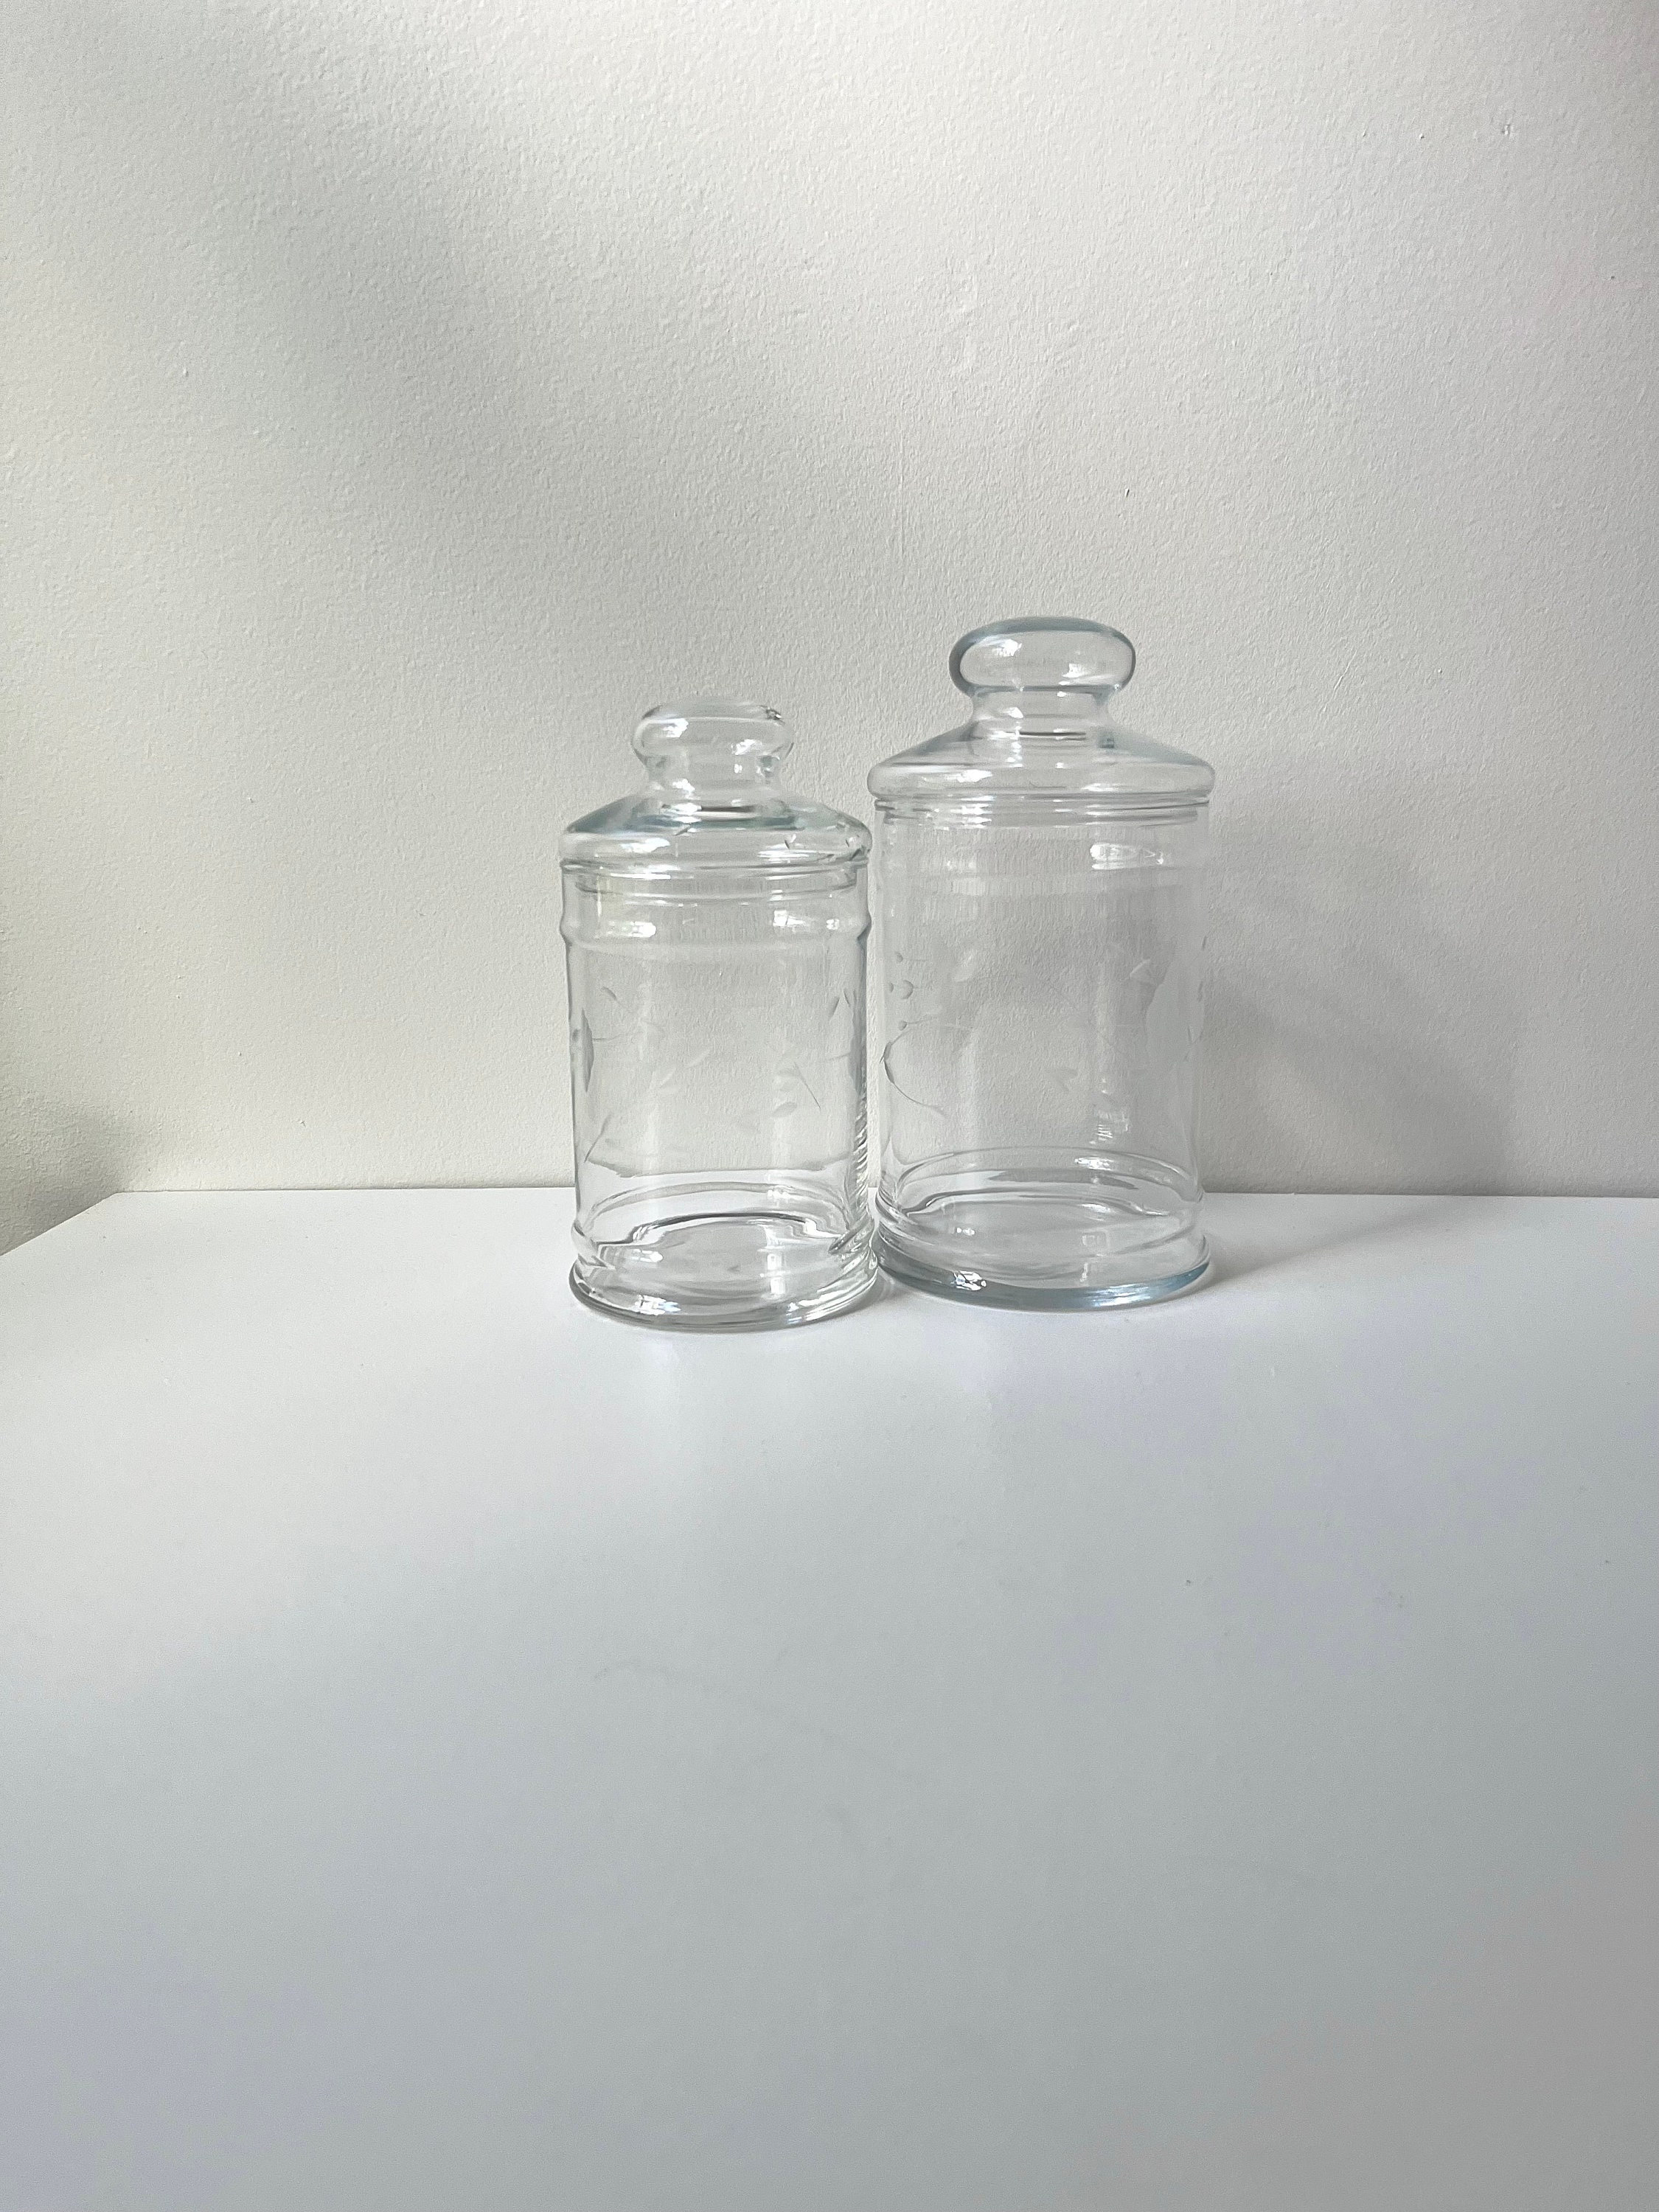 Tall 17.5 Apothecary Jar by Quick Candles